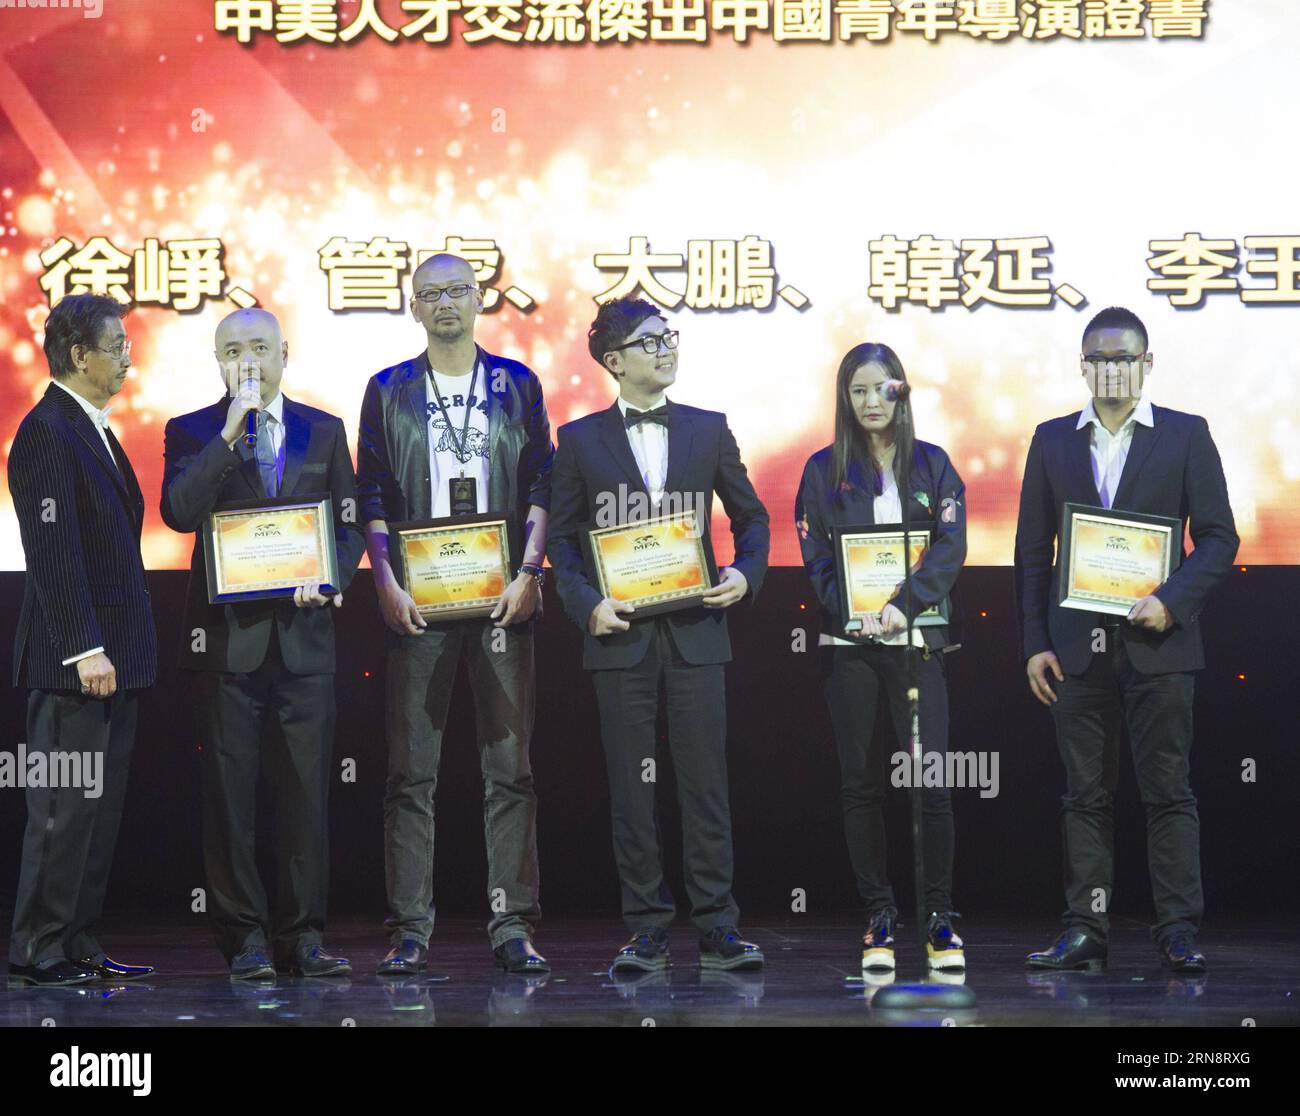 (151104) -- LOS ANGELES, Nov. 3, 2015 -- Xu Zheng, Guan Hu, Da Peng, Li Yu and Han Yan (from 2nd L to R) receive the Certificate of Excellent Chinese Young Directors at the Ricardo Montalban Theatre during the Chinese American Film Festival in Los Angeles, the United States, on Nov. 3, 2015. ) US-LOS ANGELES-CHINESE AMERICAN FILM FESTIVAL YangxLei PUBLICATIONxNOTxINxCHN   Los Angeles Nov 3 2015 Xu Zheng Guan HU there Peng left Yu and Han Yan from 2nd l to r receive The Certificate of Excellent Chinese Young Directors AT The Ricardo Mont Alban Theatre during The Chinese American Film Festival i Stock Photo